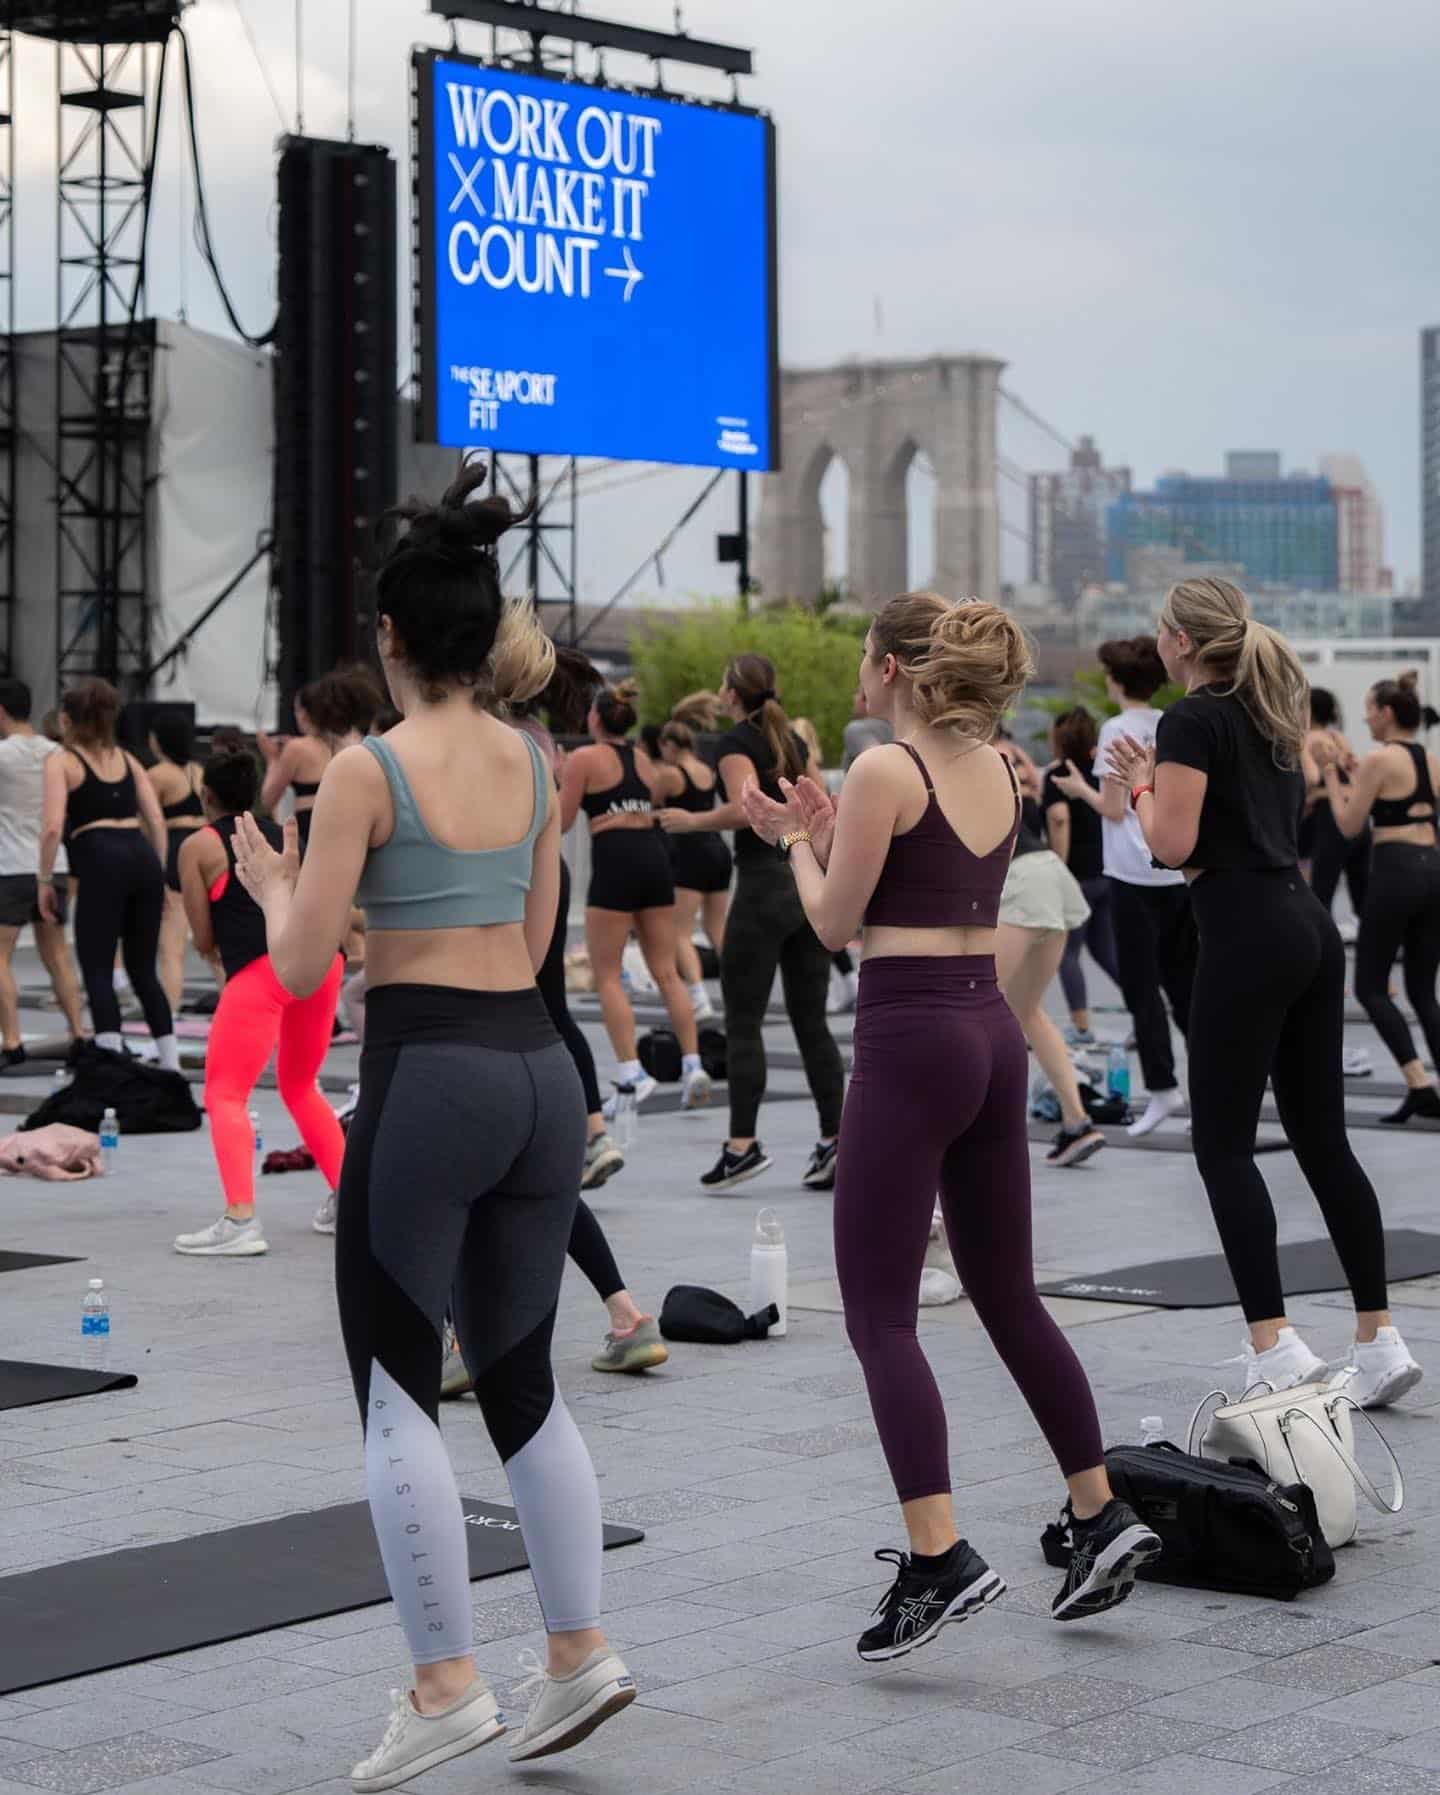 Skyline views. Waterfront breeze. The best fitness pros. Another chance to sweat. The next Plus-Up workout → this Thursday. Join @rachel_fitness for a 30 min full-body strength-training workout 

🗓️ Thurs, 7/13
 6:30 - 7:10pm
 The Rooftop at Pier 17
is presented by @nyphospital

All proceeds of ticket sales will be donated to the @amfar, whose mission is to end the global AIDS epidemic through innovative research.

Tickets ➤ link in bio